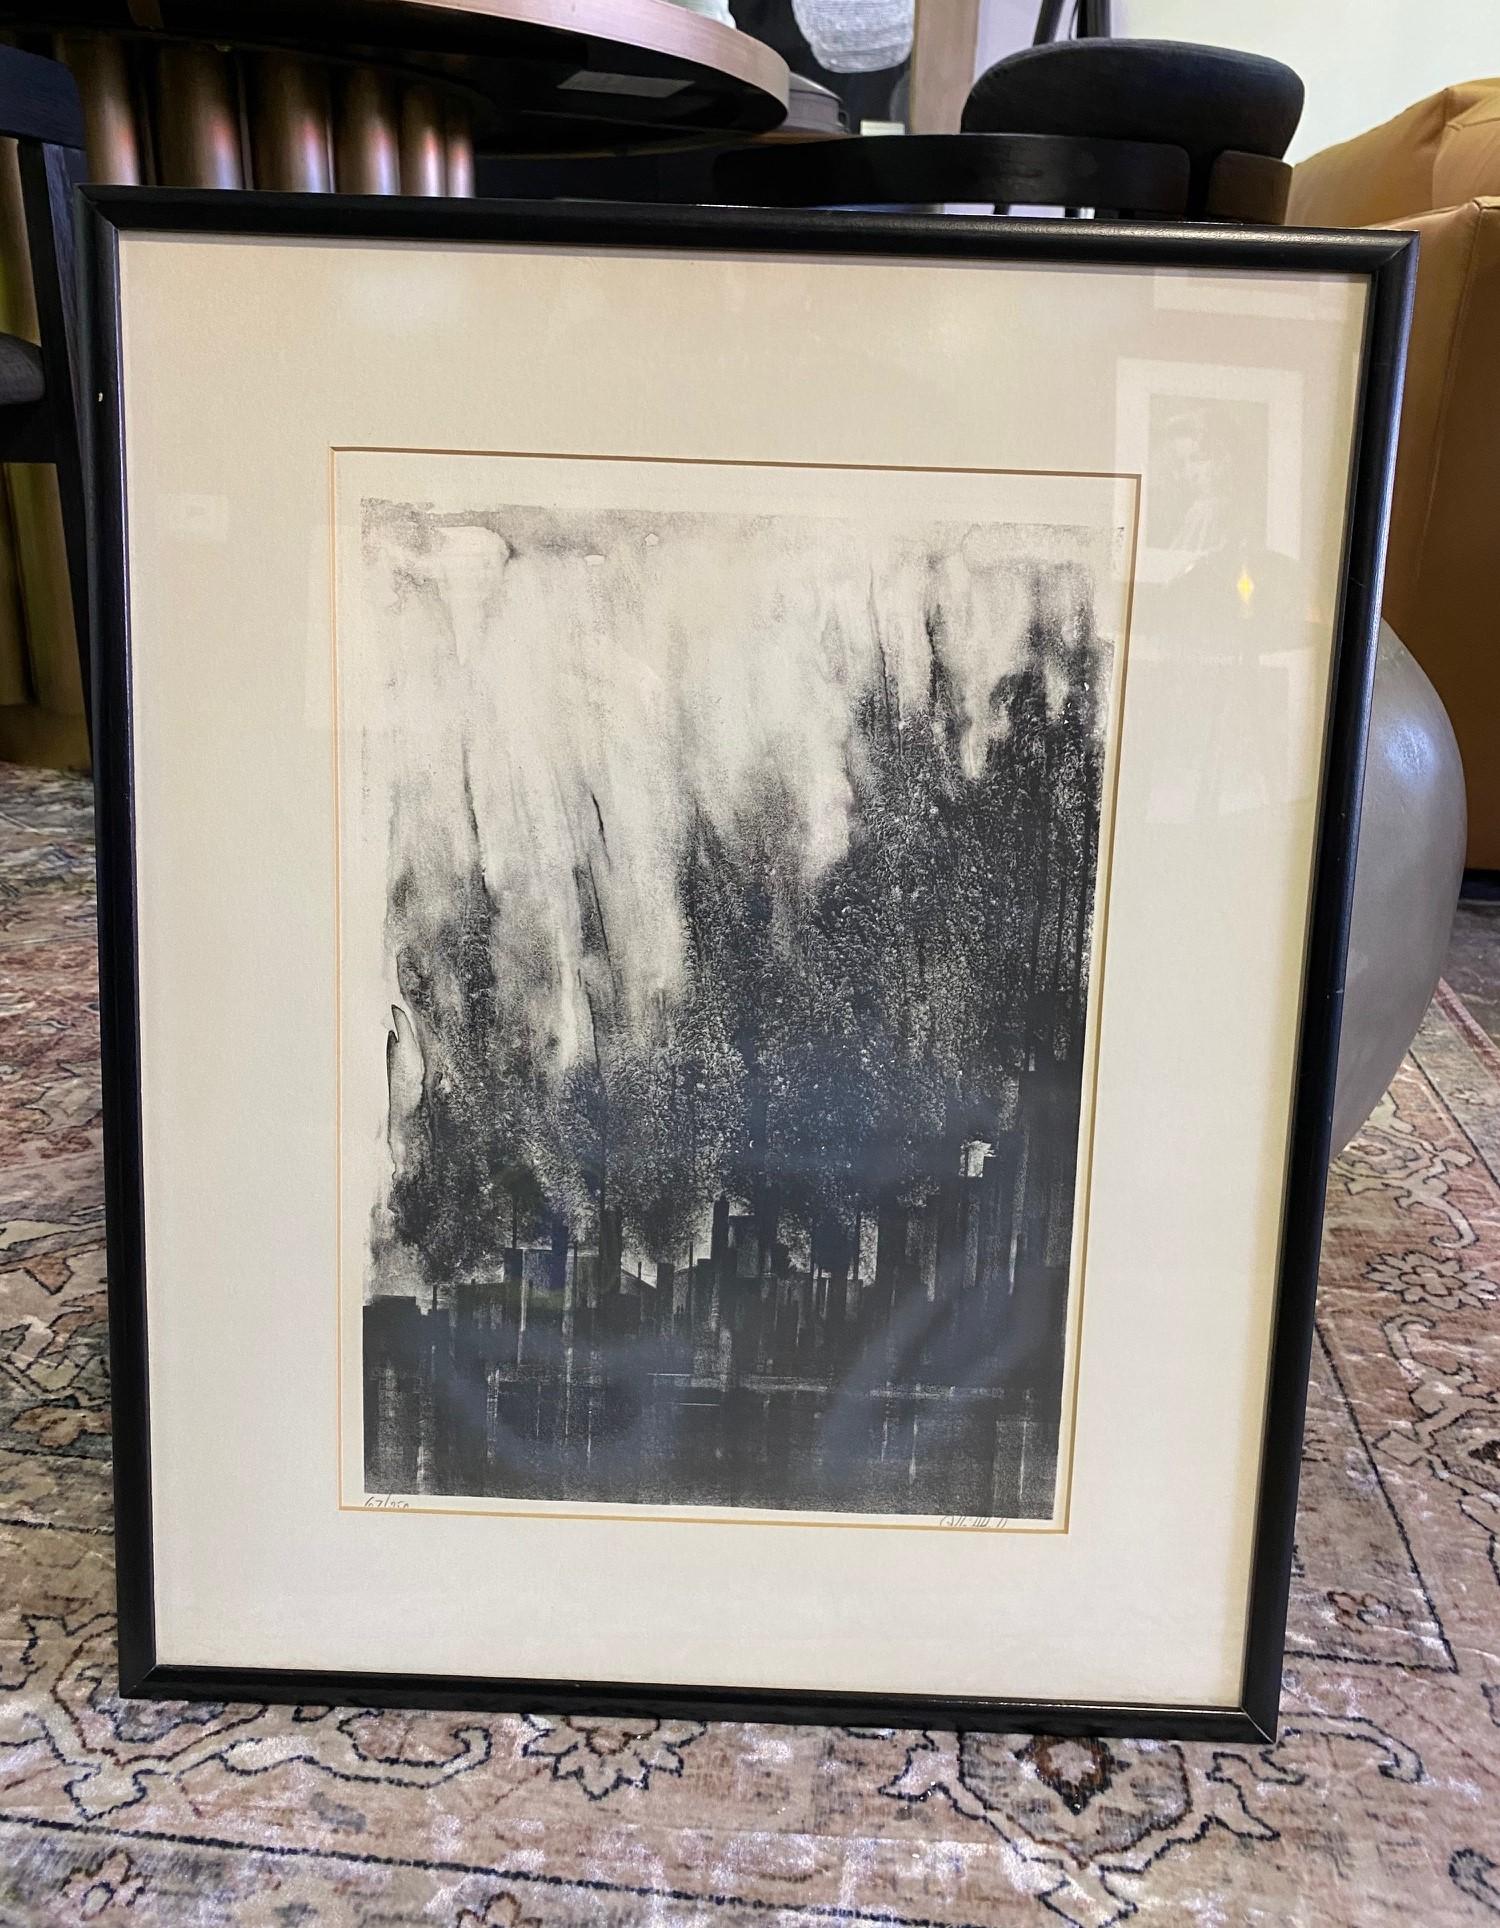 A wonderful and alluring, dark, rich black and white lithograph by Chicago-born American painter and artist Richard Florsheim. 

The work, titled 